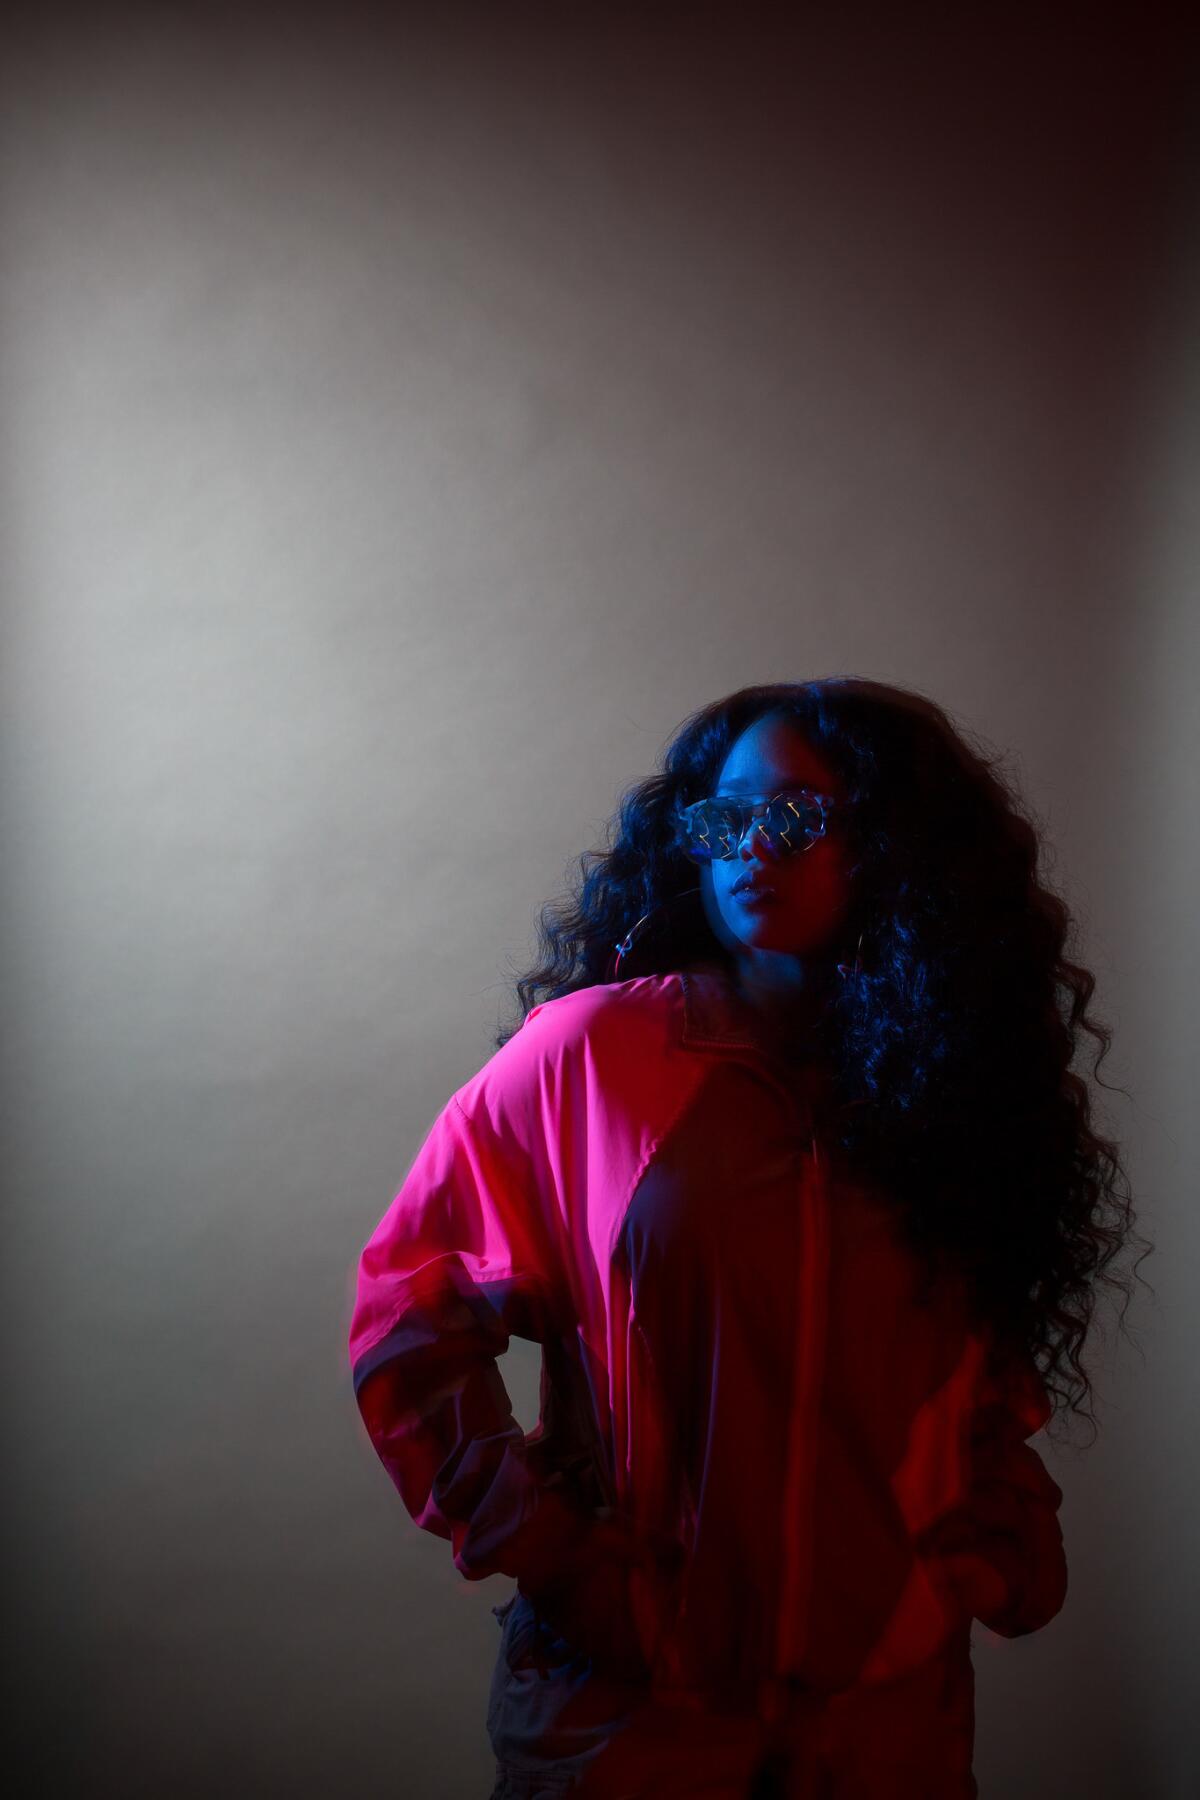 Musical artist H.E.R. photographed in Brooklyn, New York, on Nov. 27, 2018